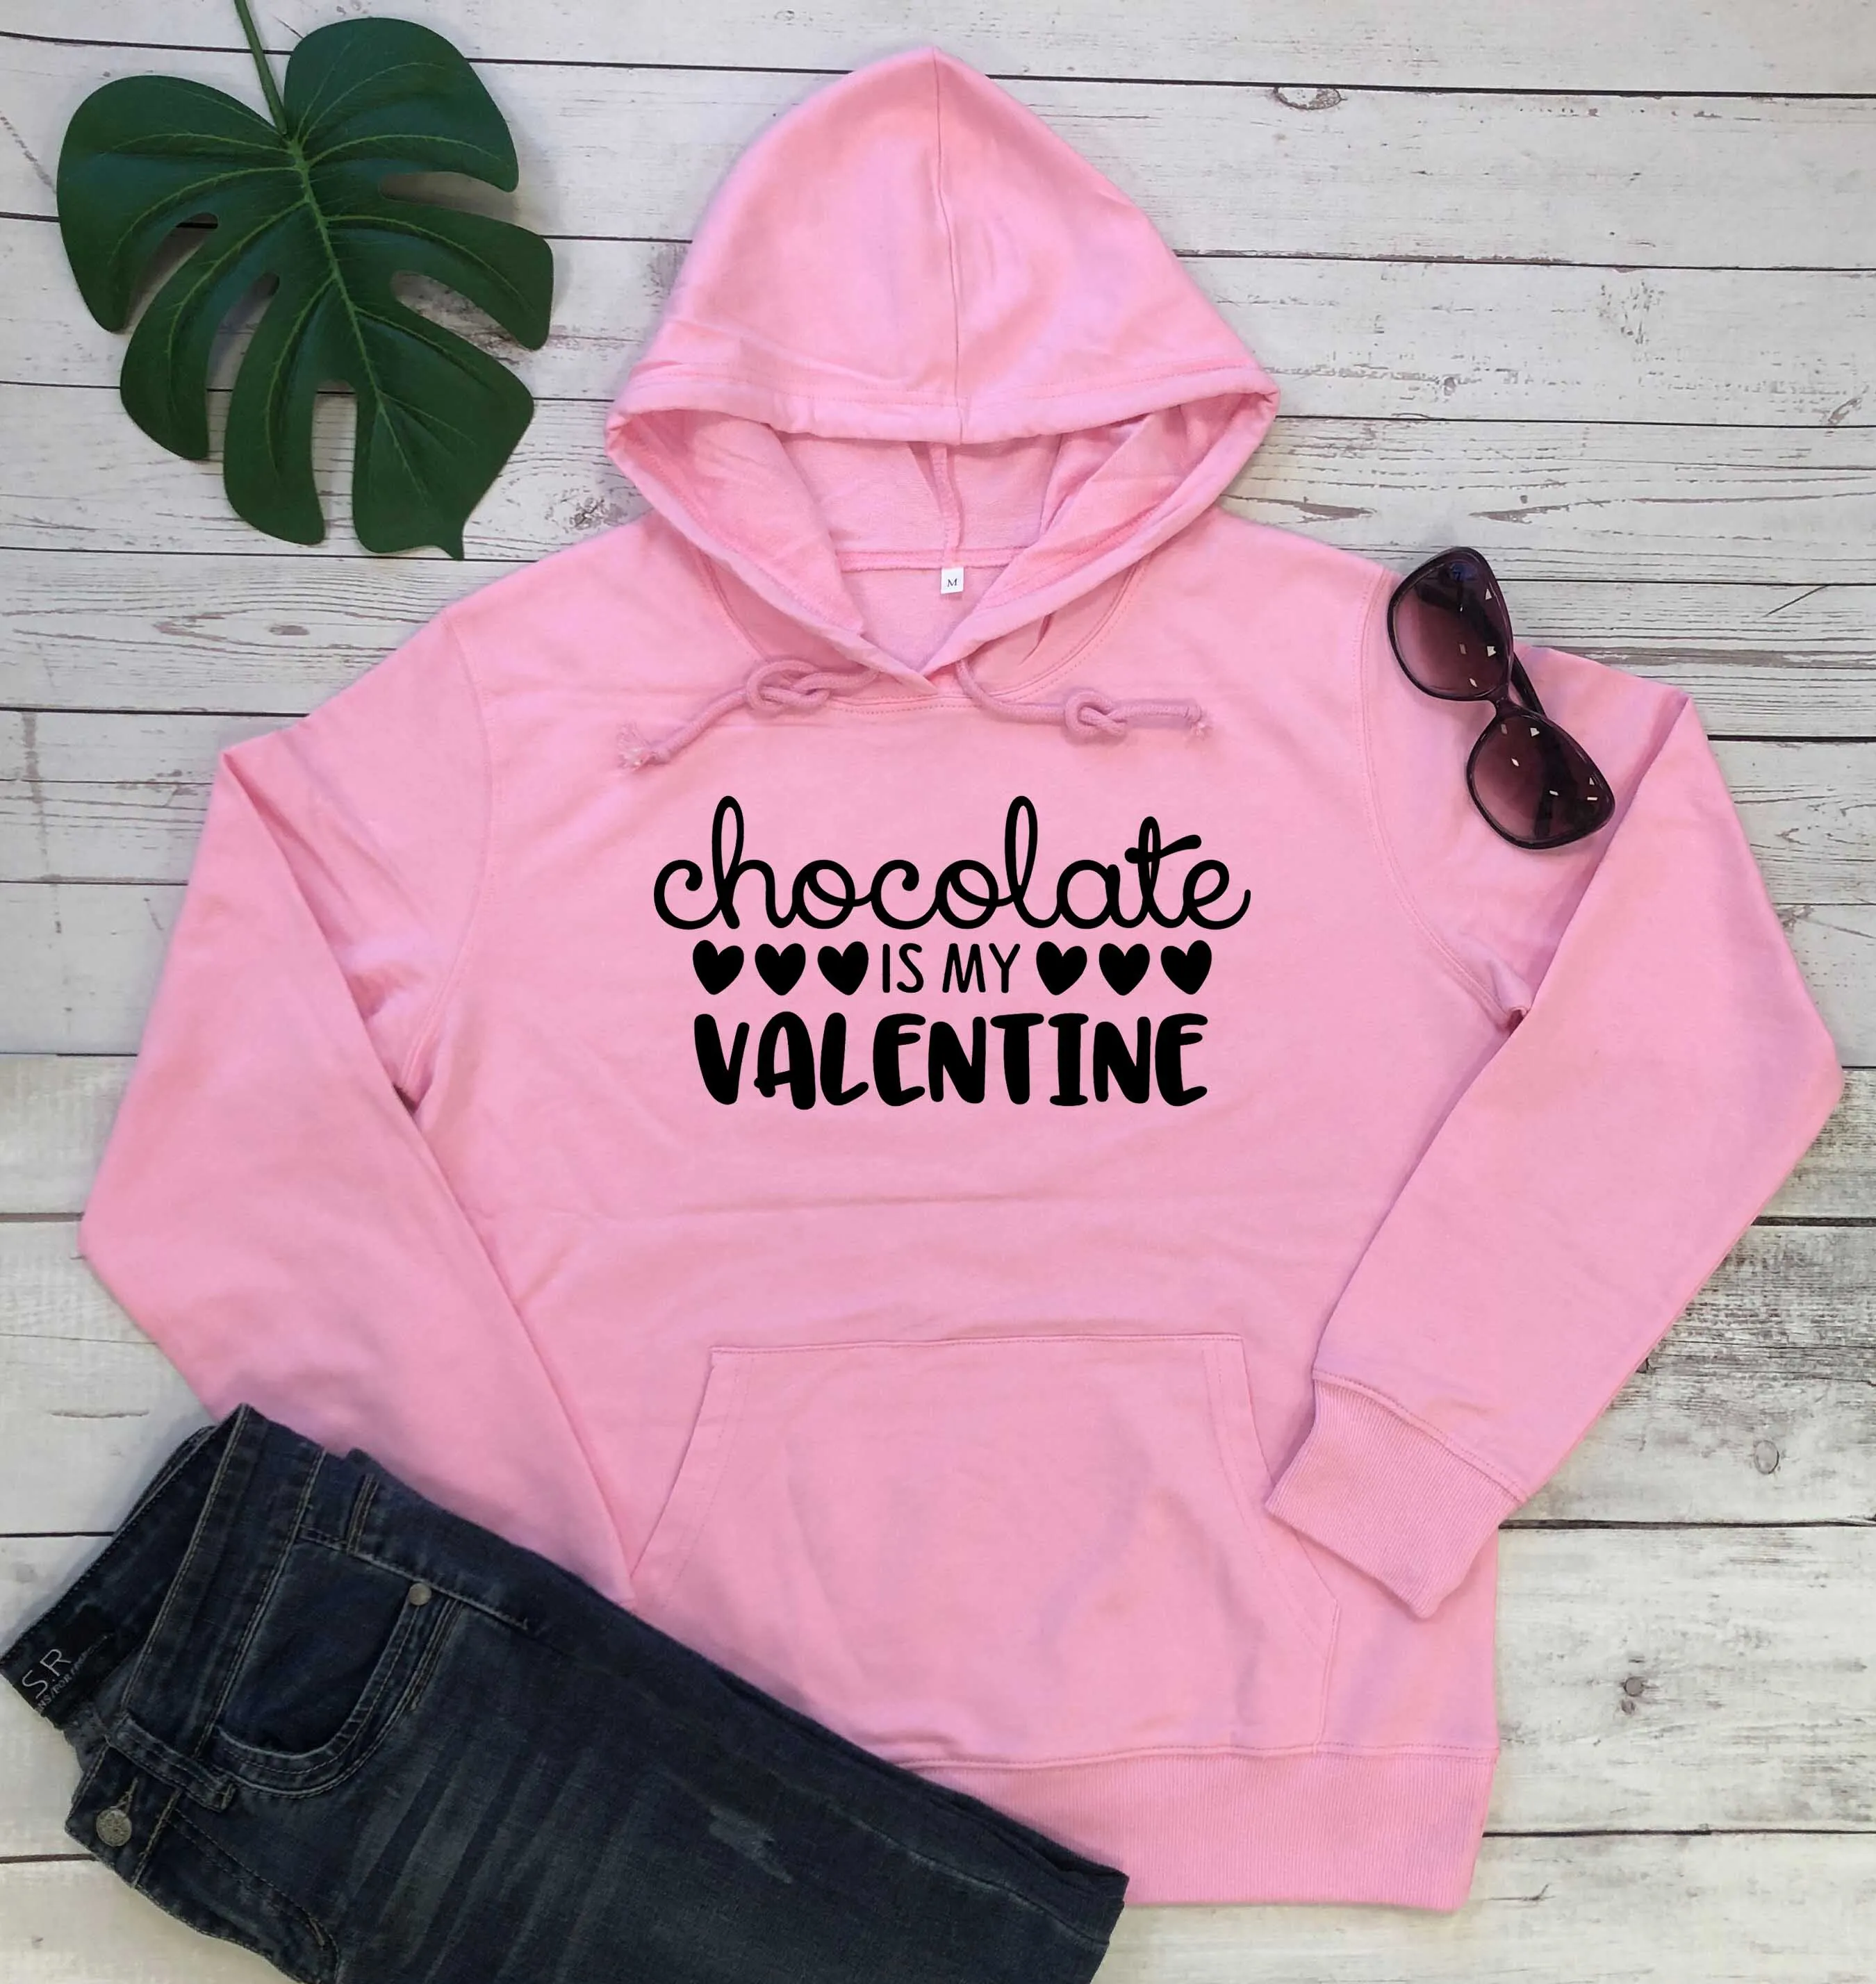 

Chocolate Is My Valentine hoodies women fashion heart graphic holiday gift casual slogan quote aesthetic girl gift pullovers top